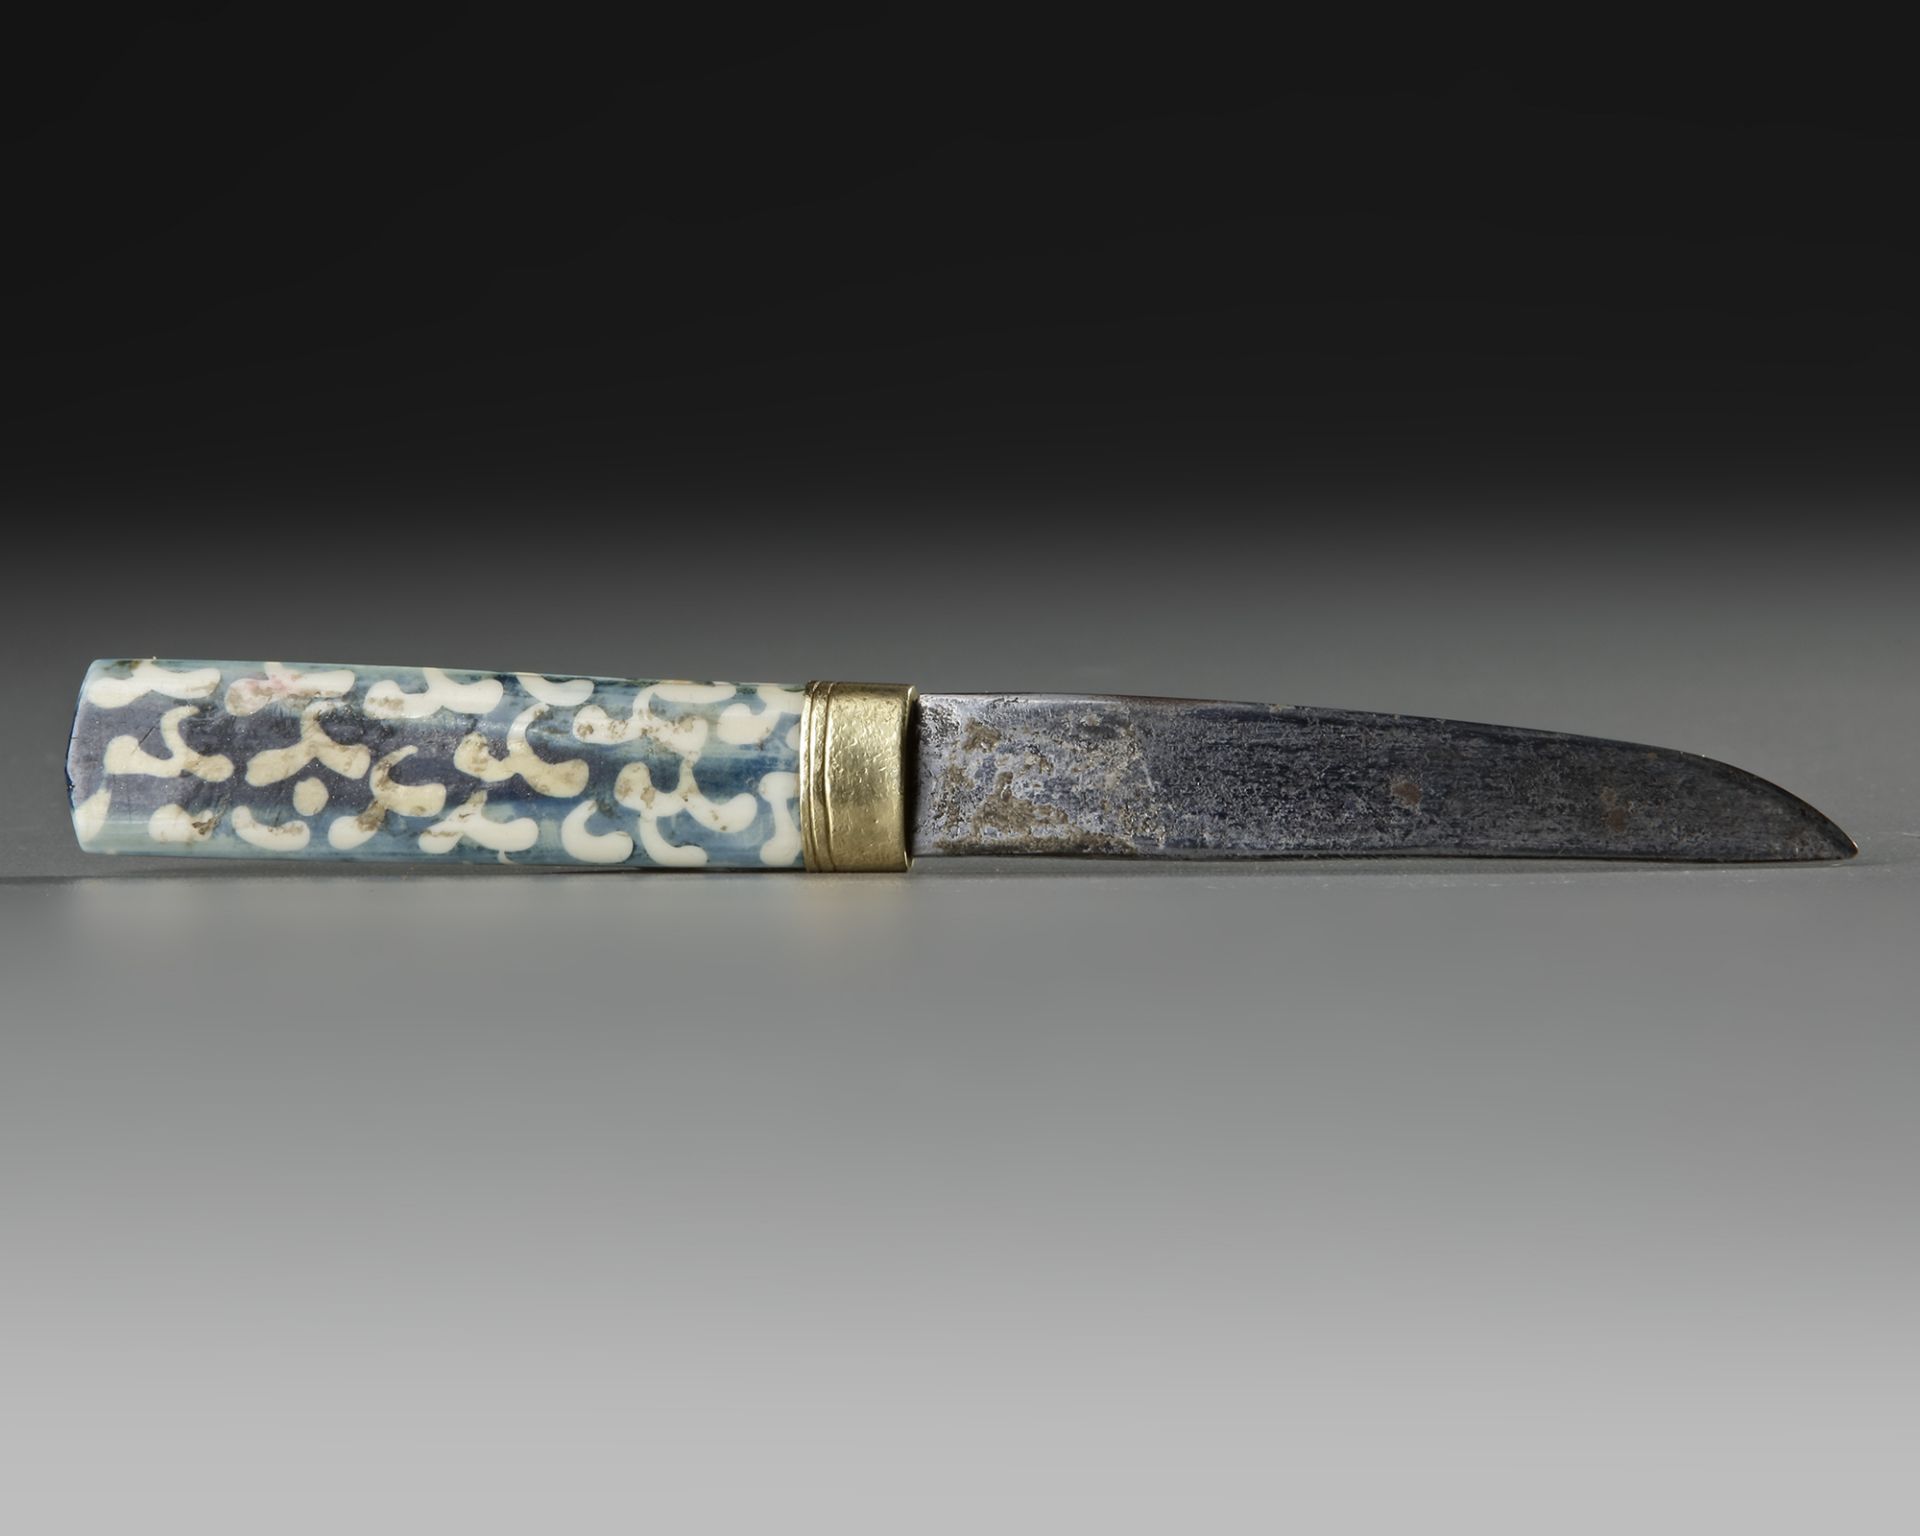 A SMALL INSCRIBED KNIFE, LATE TIMURID, 15TH-16TH CENTURY - Image 12 of 12